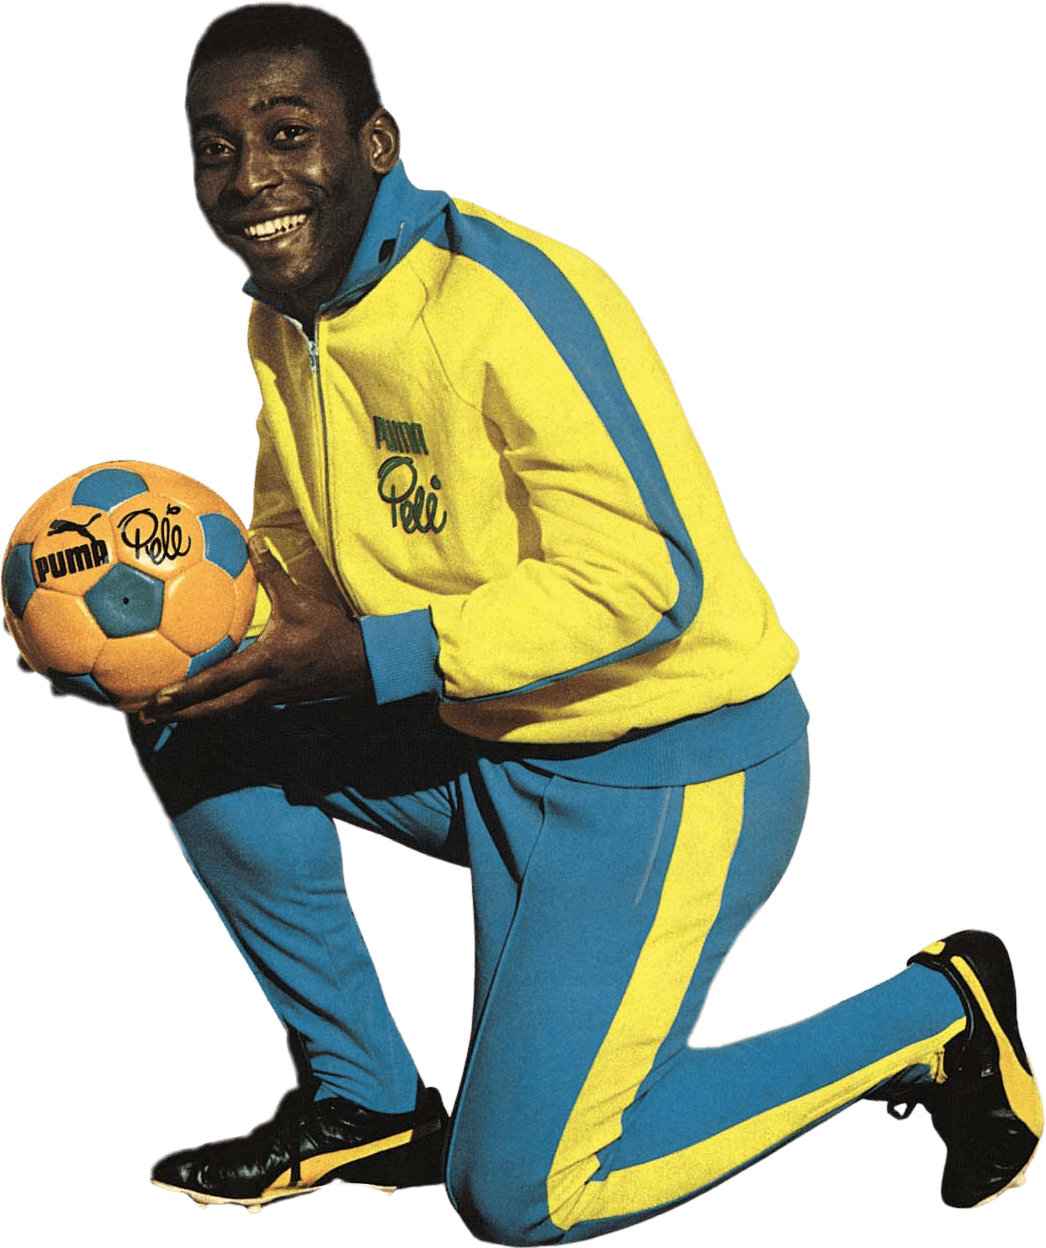 Soccer legend pelé became a superstar with his performance in the 1958 worl...